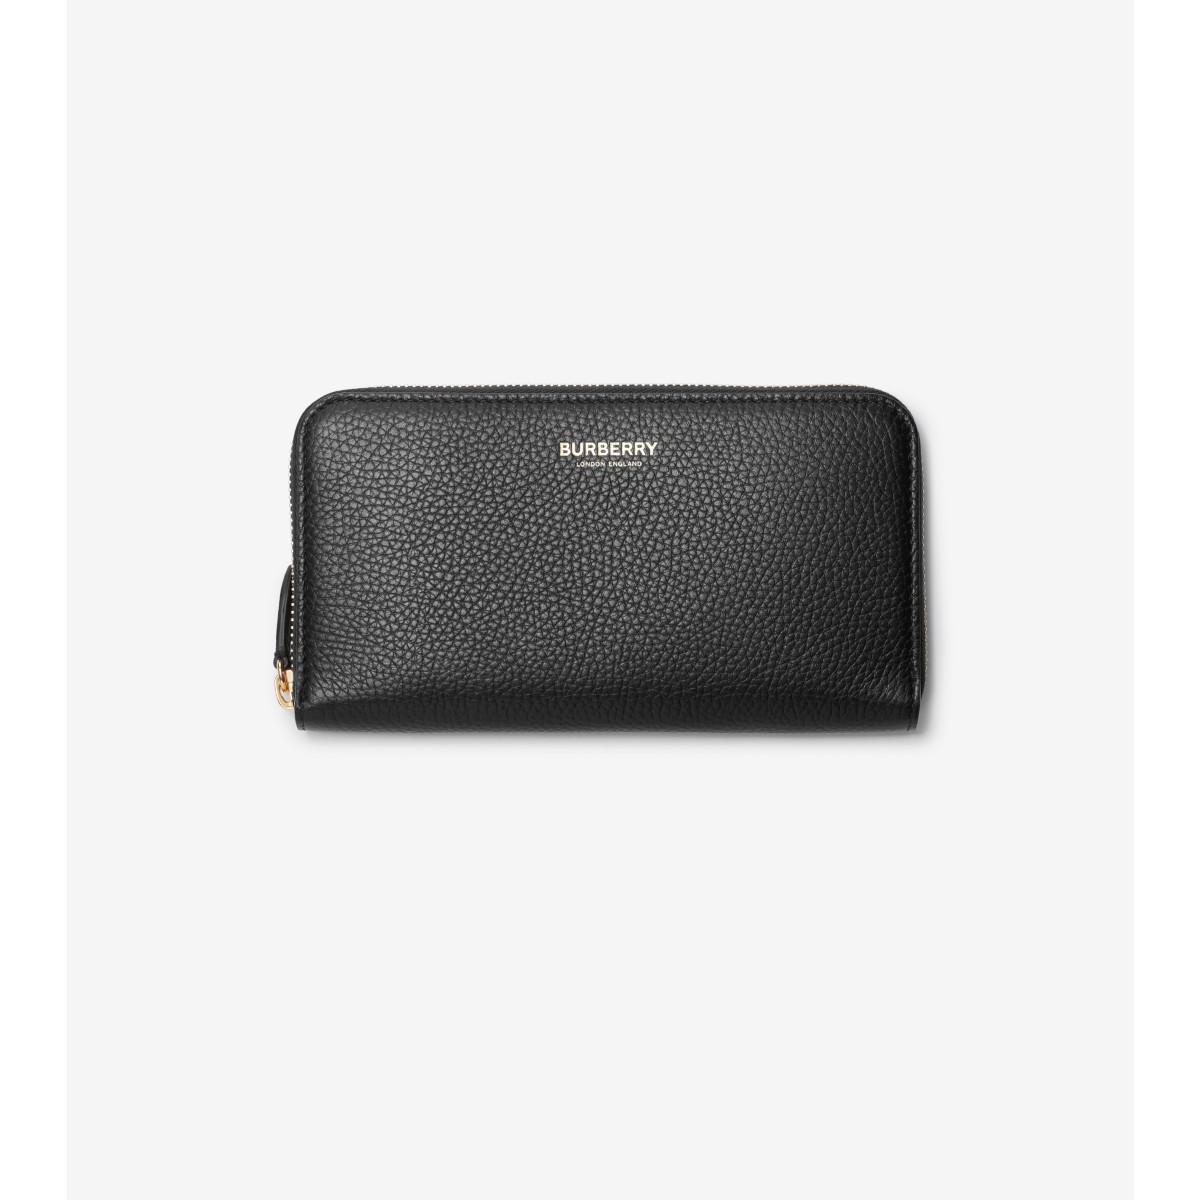 Burberry Large Leather Zip Wallet In Black